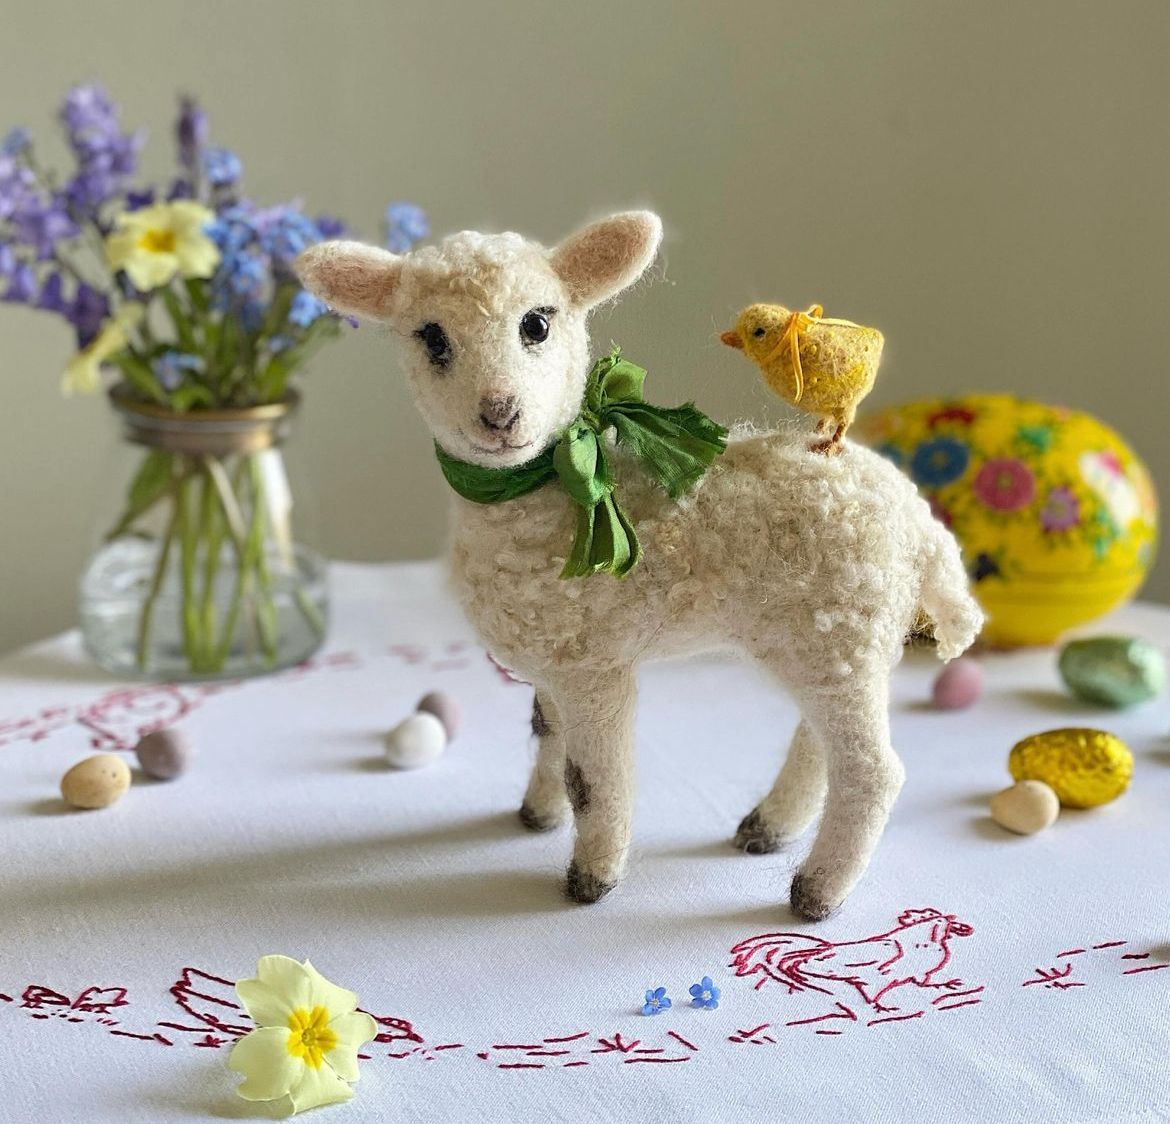 Spring has sprung. What a difference a day, a week, a month makes as nature wakes up from the slumber of winter in its abundance with blankets of daffodils, blossom on the trees and lambs appearing in the fields. Happy Easter 🐏🐰🐣 📸 & 🐏 Textile artist Susie Sage @wildandwool